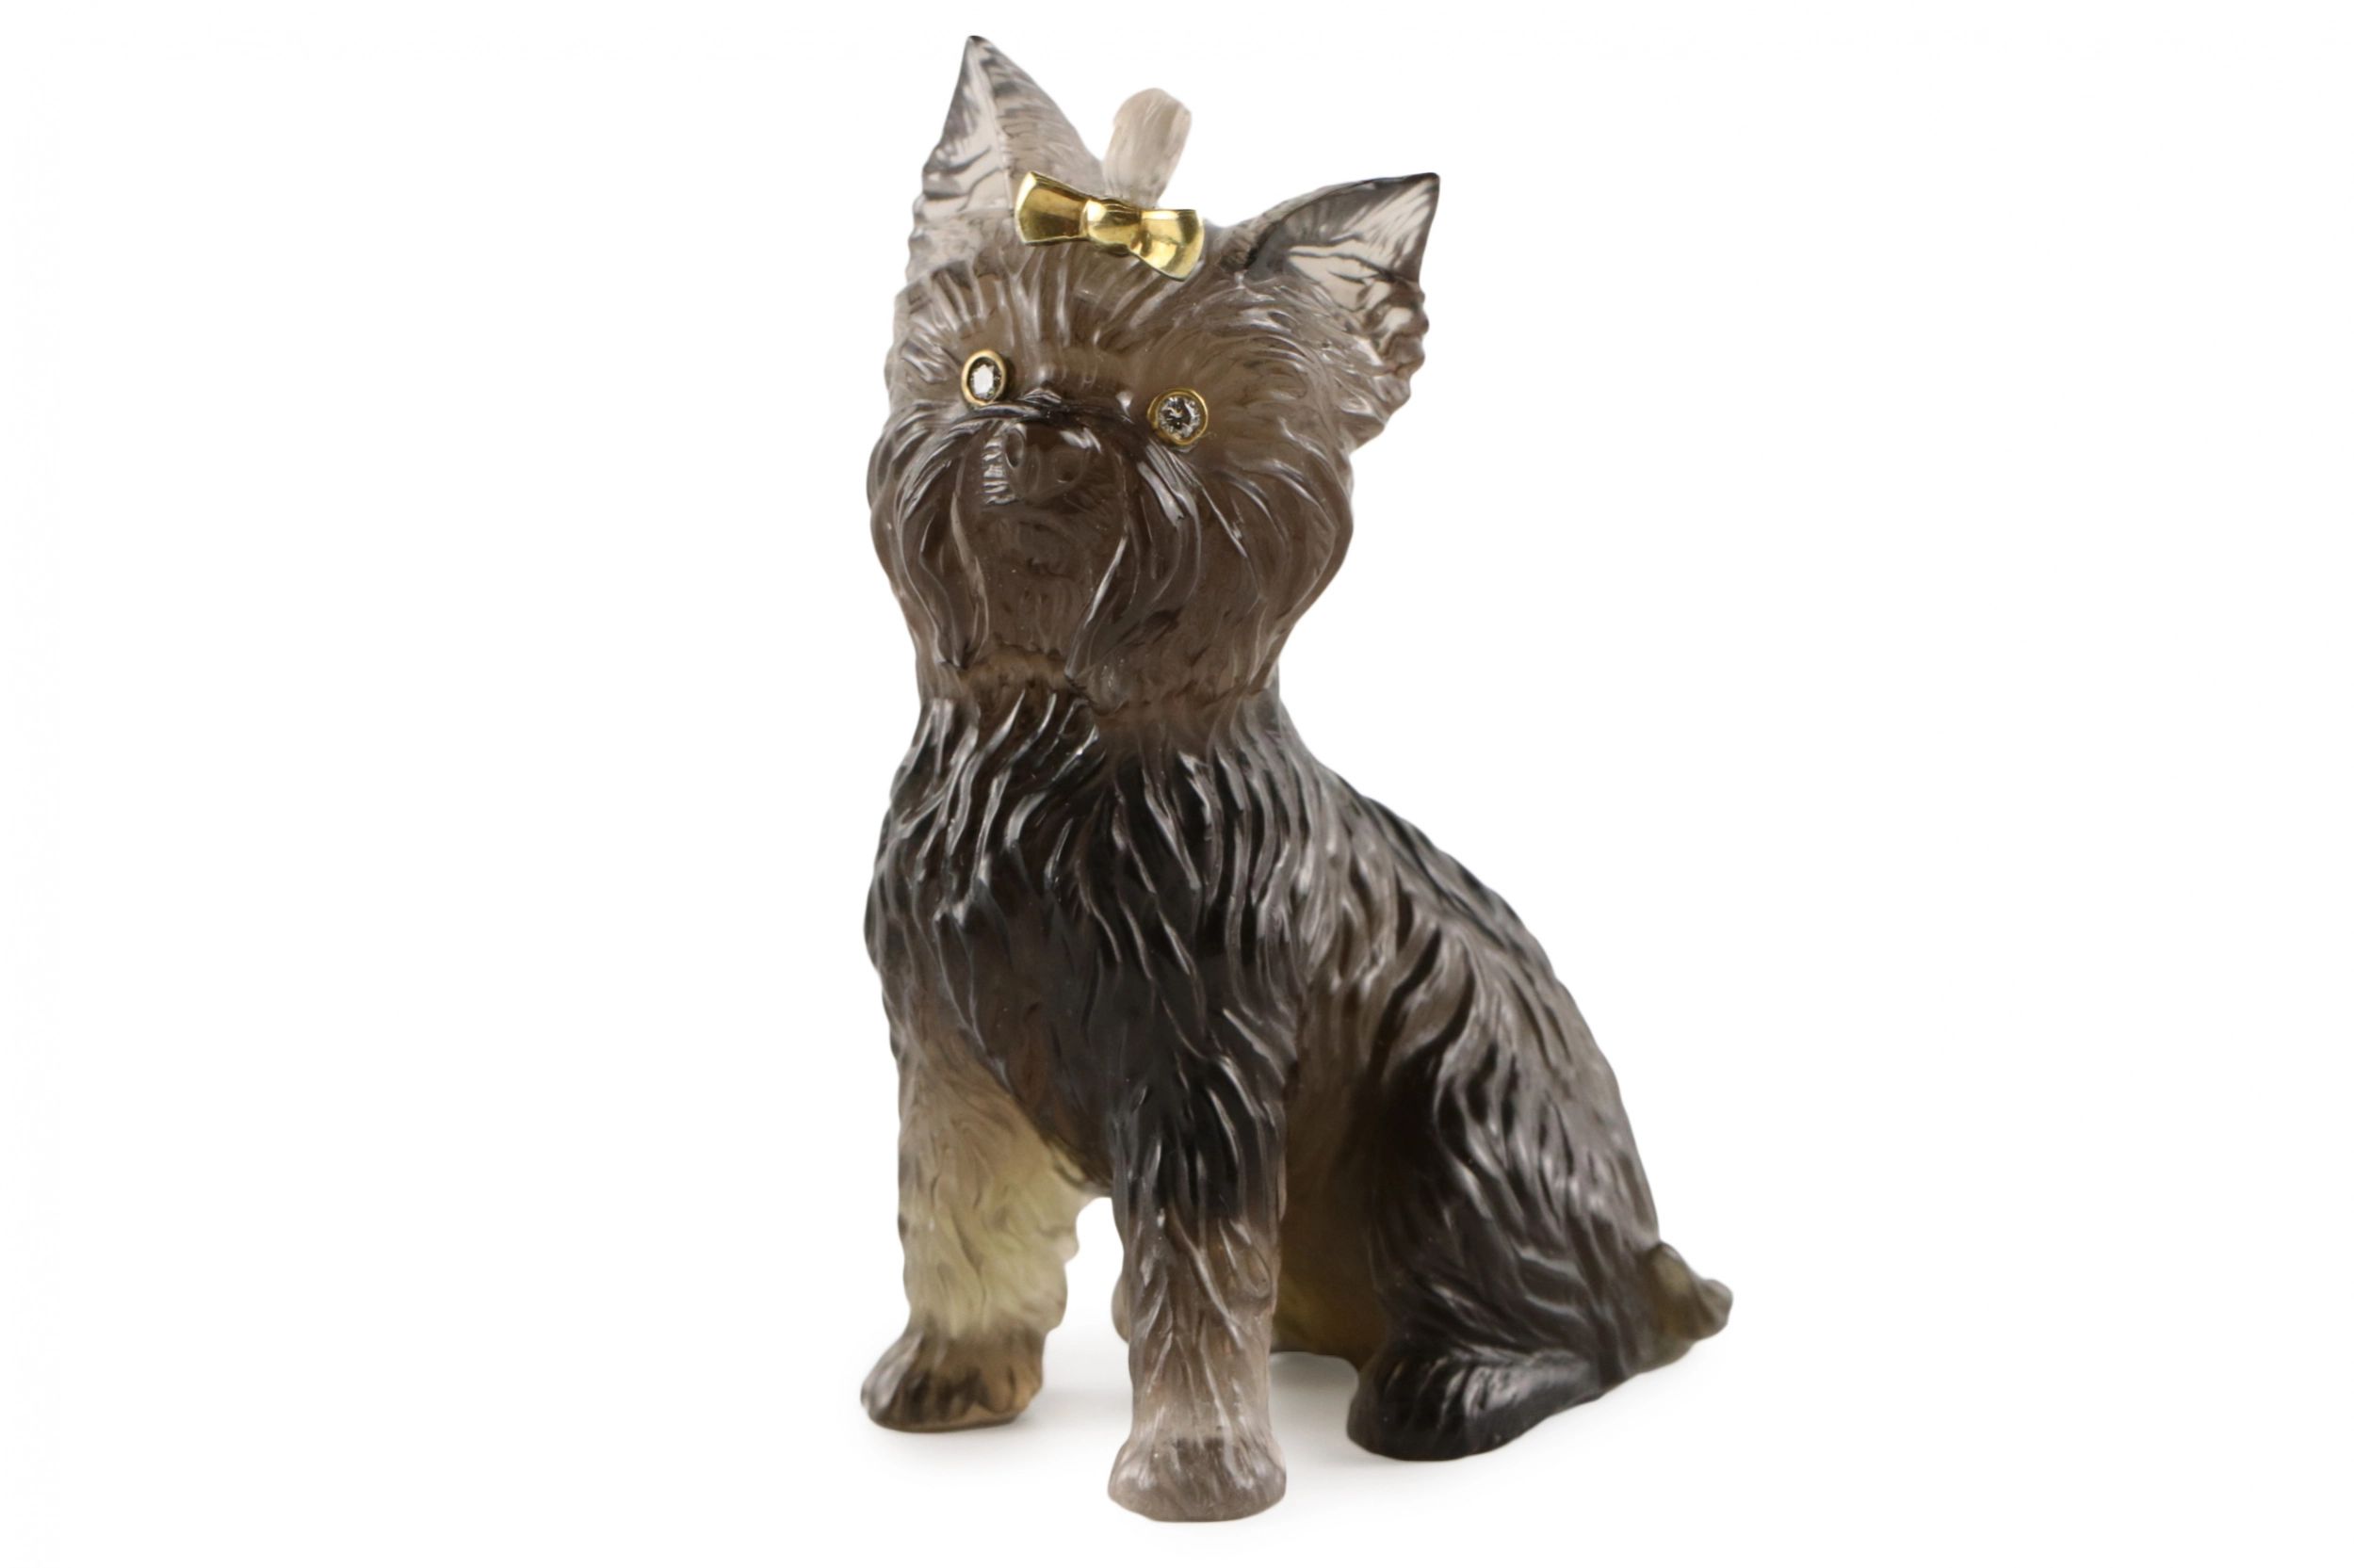 Stone-cut-figurine-Yorkshire-Terrier-in-the-style-of-Faberge-20th-century-